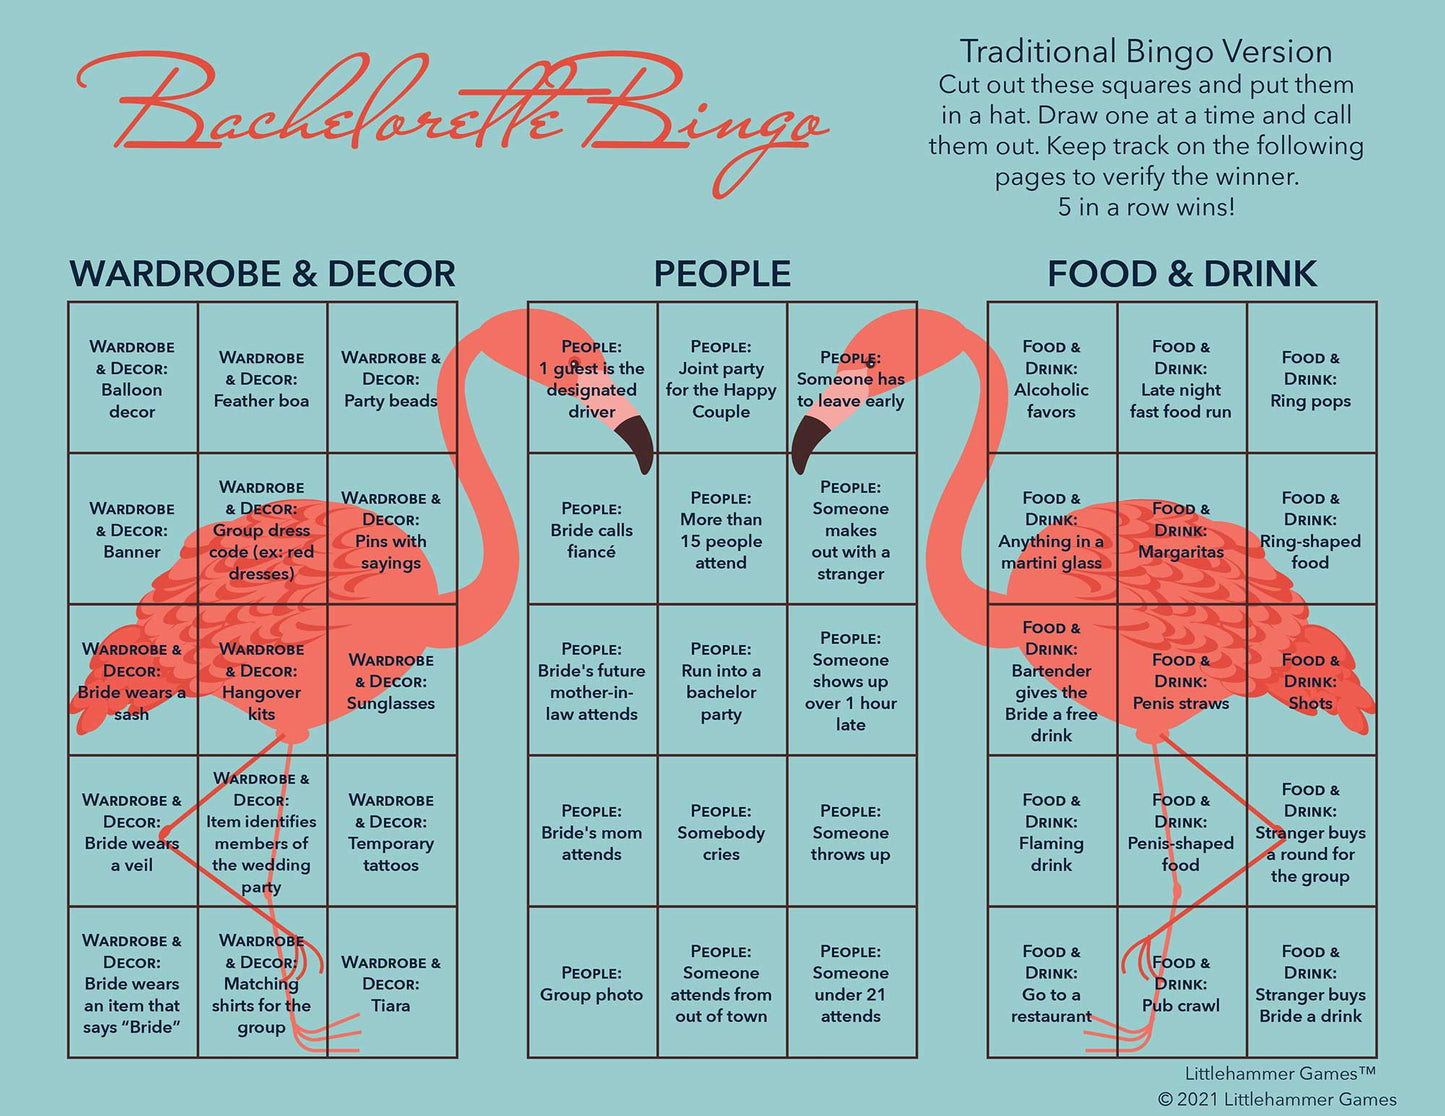 Bachelorette Bingo calling card with a bright flamingo on a blue background